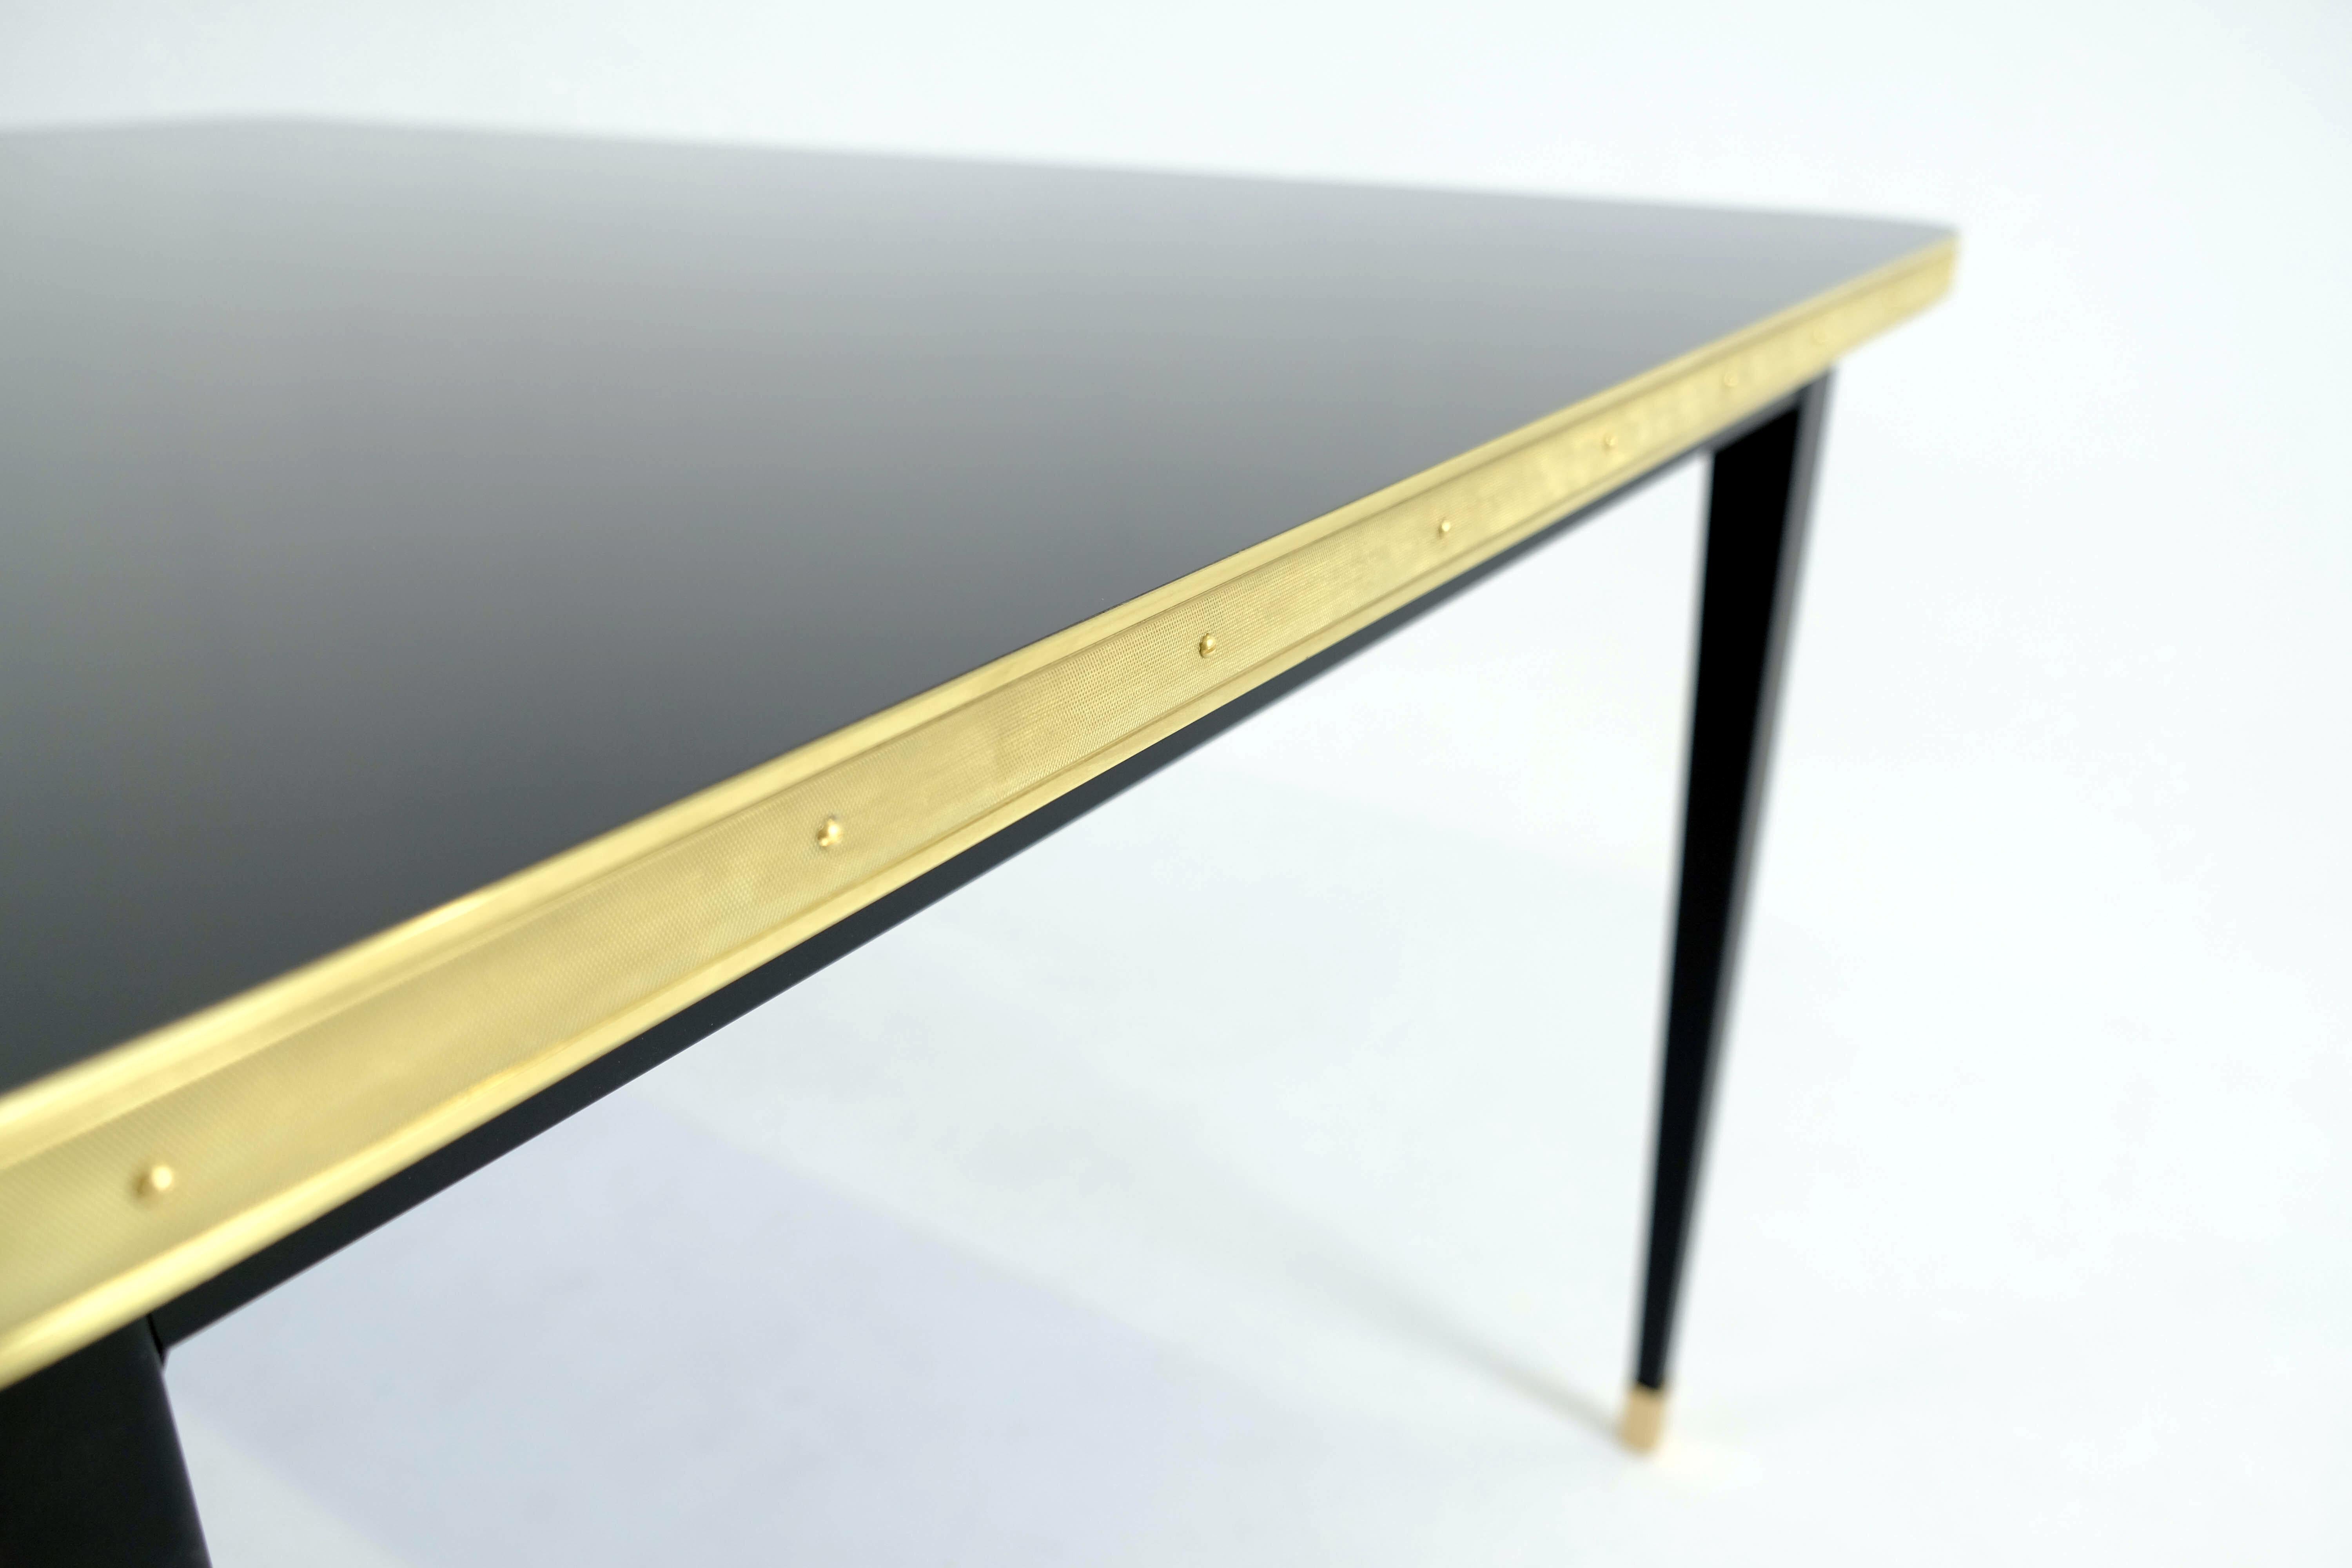 Julieta Colection. 

Table with Black Steel Conical Legs with Brass Bottom End Table Top on High Gloss Laminate Brass Tape Frame

Introducing the stunning dining room table with black powder-coated steel construction, boasting sleek conical legs